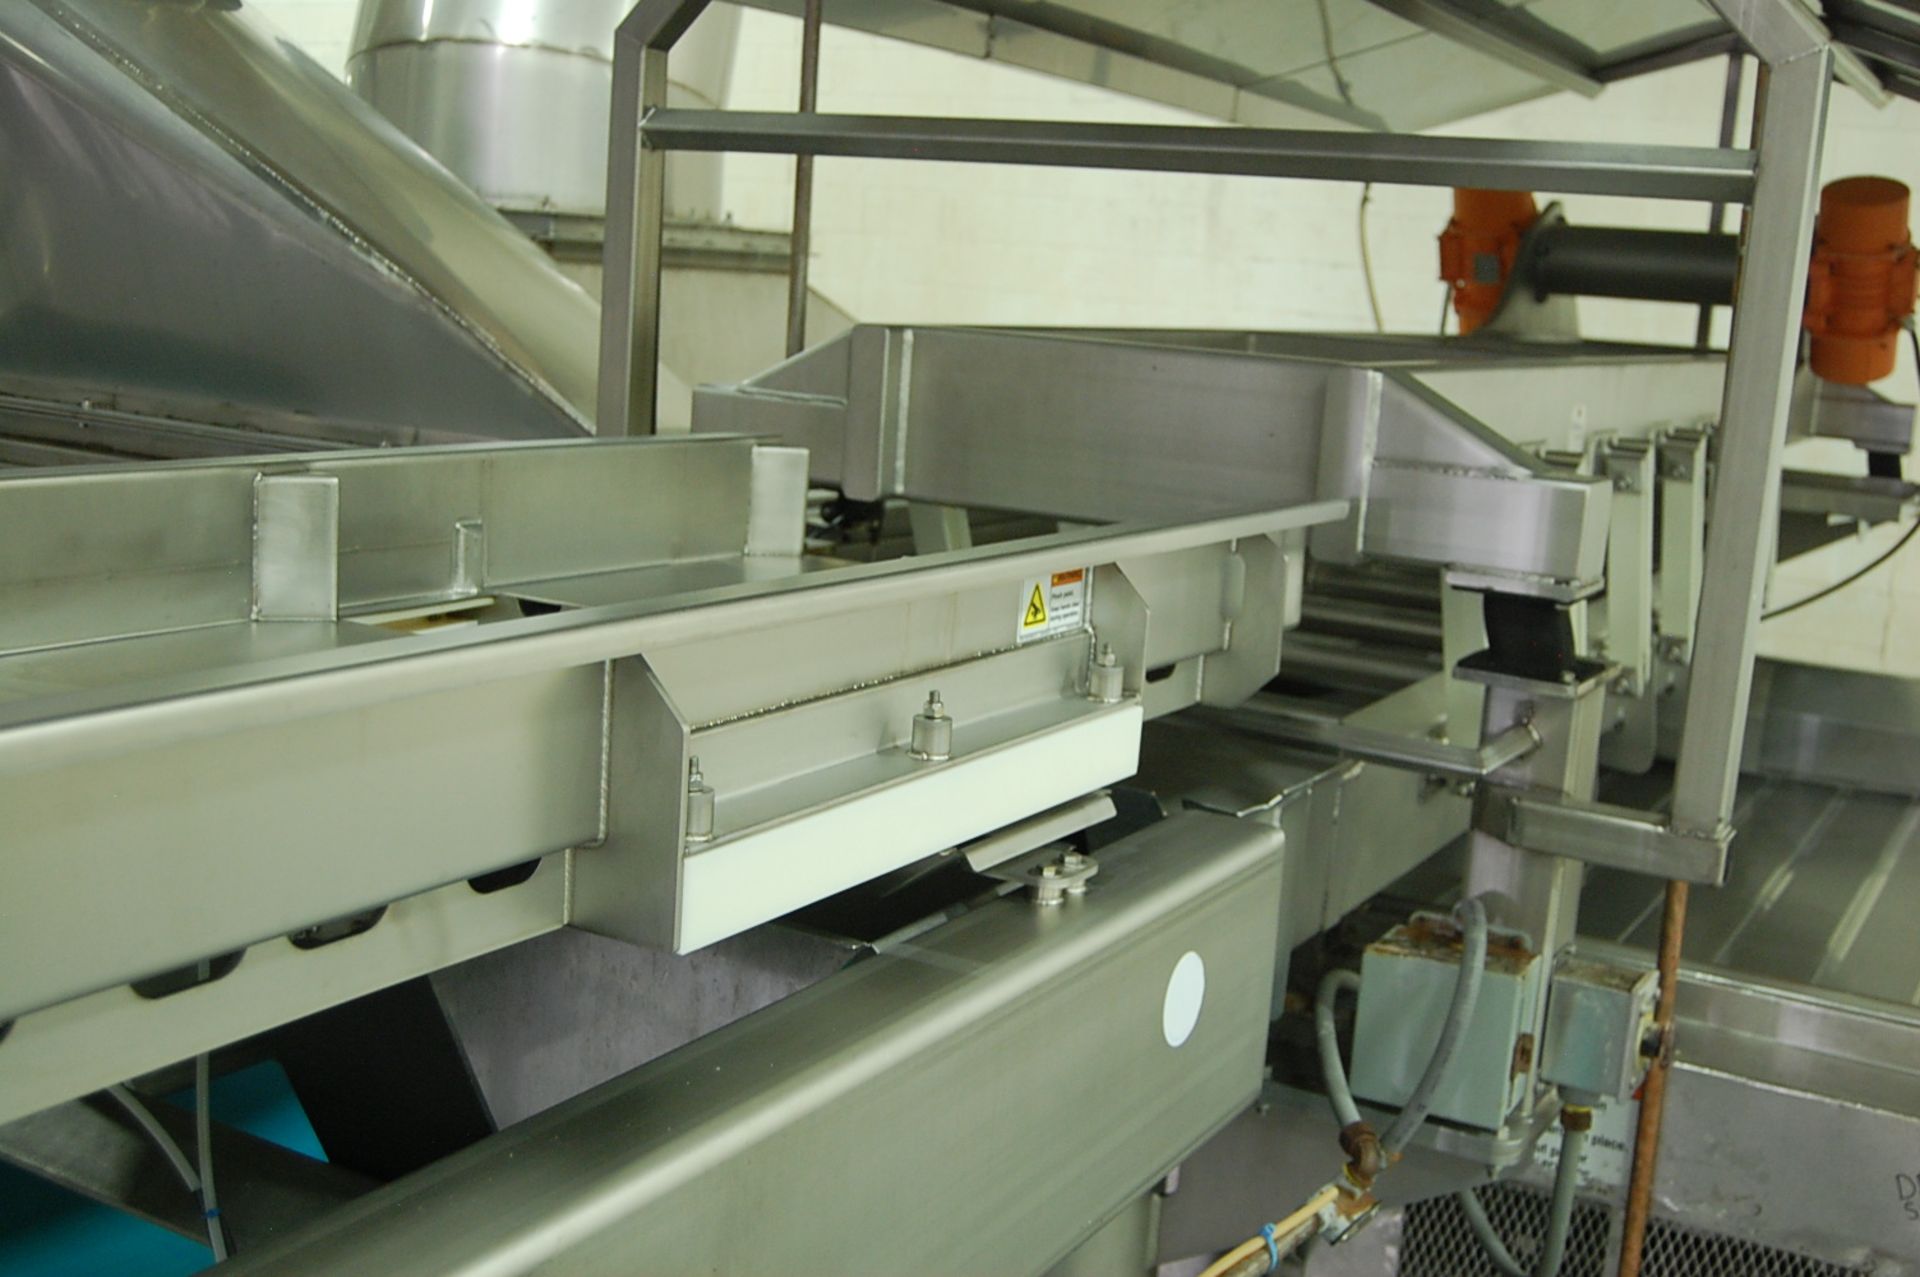 Smalley 25' x 24" Stainless Steel Vibratory Conveyor - Image 5 of 7